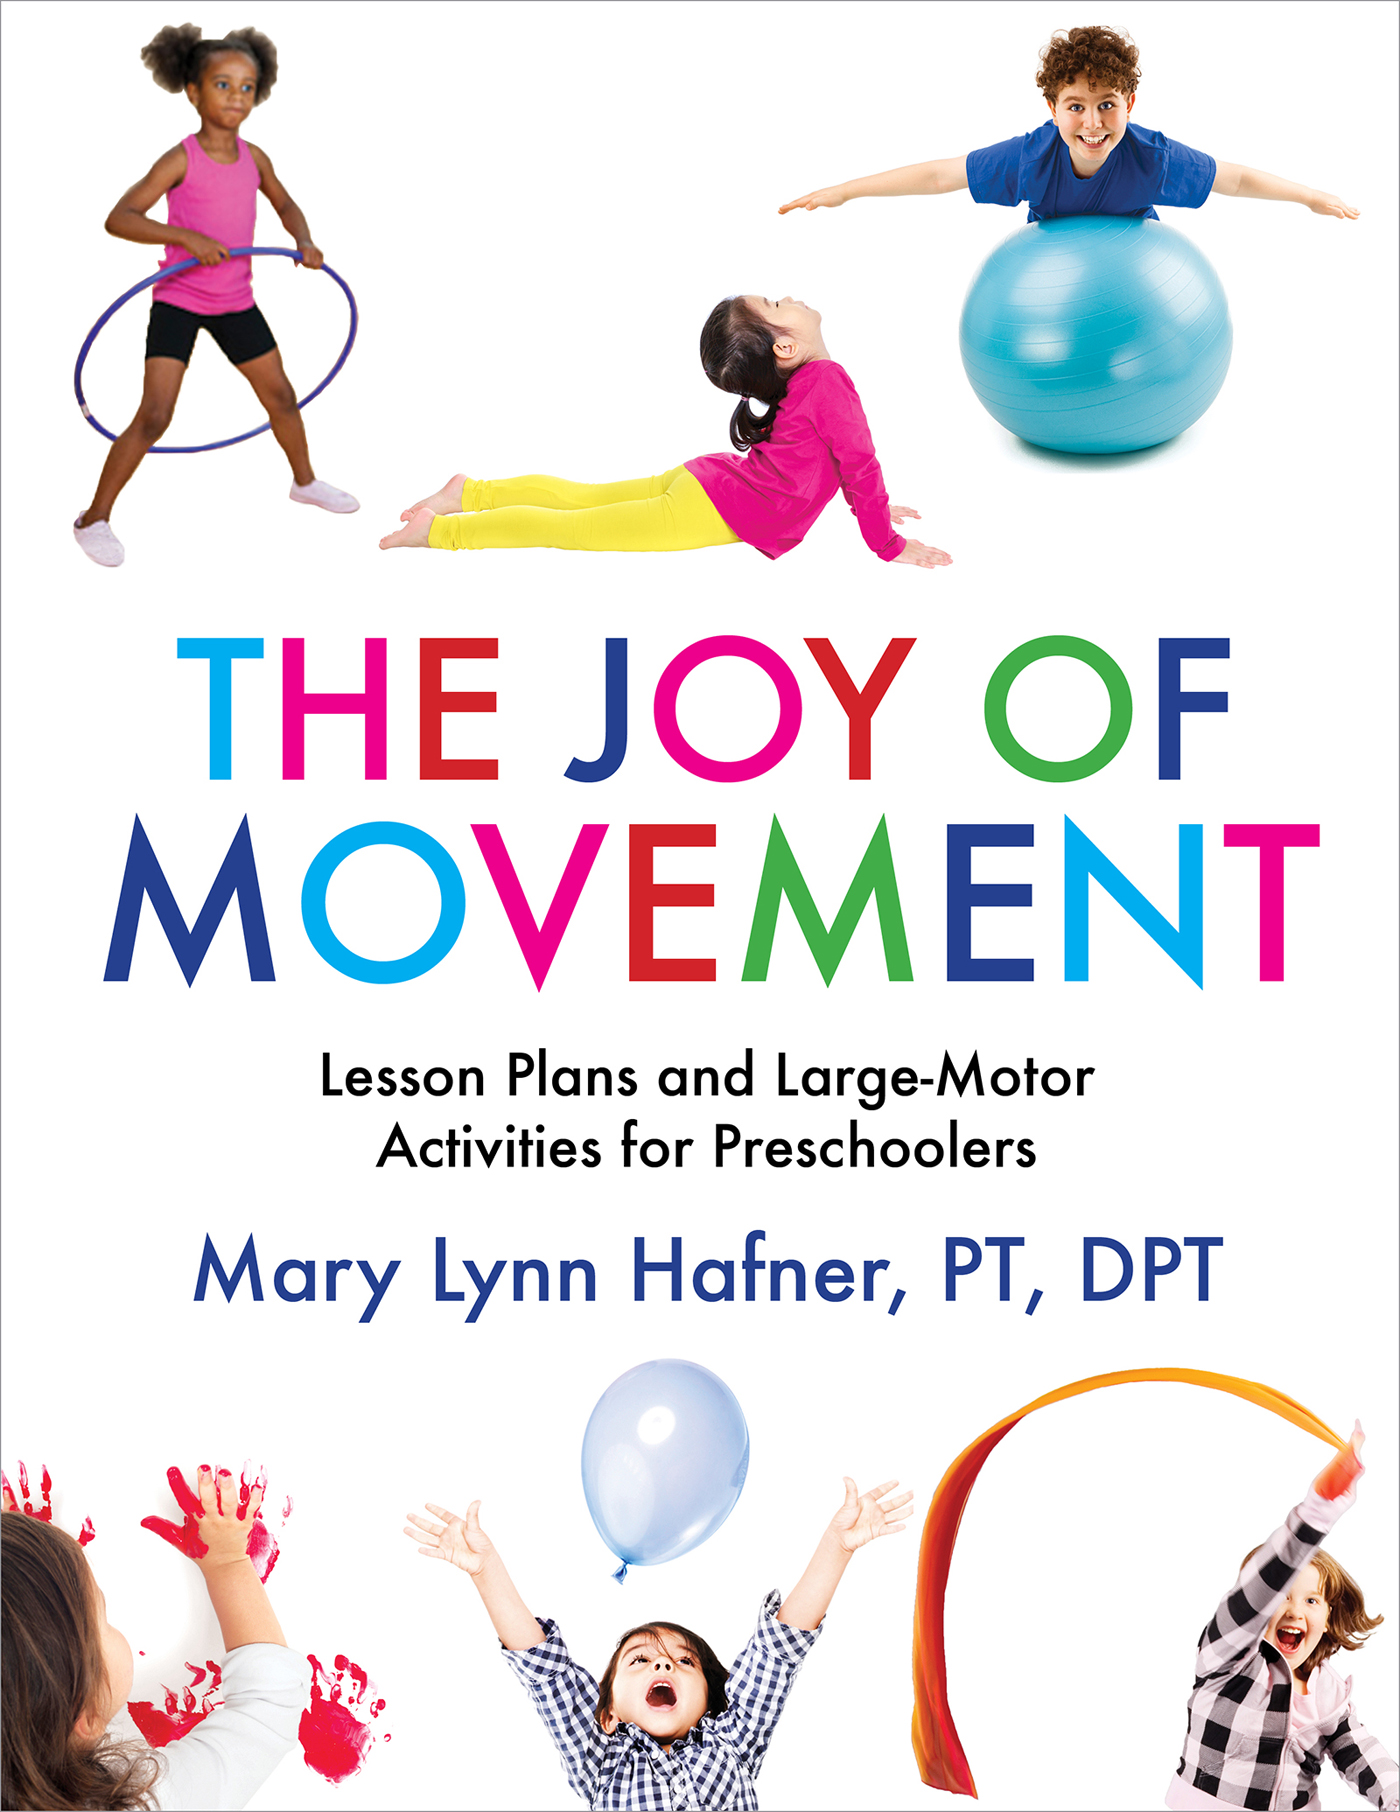 THE JOY OF MOVEMENT Lesson Plans and Large-Motor Activities for Preschoolers by - photo 1